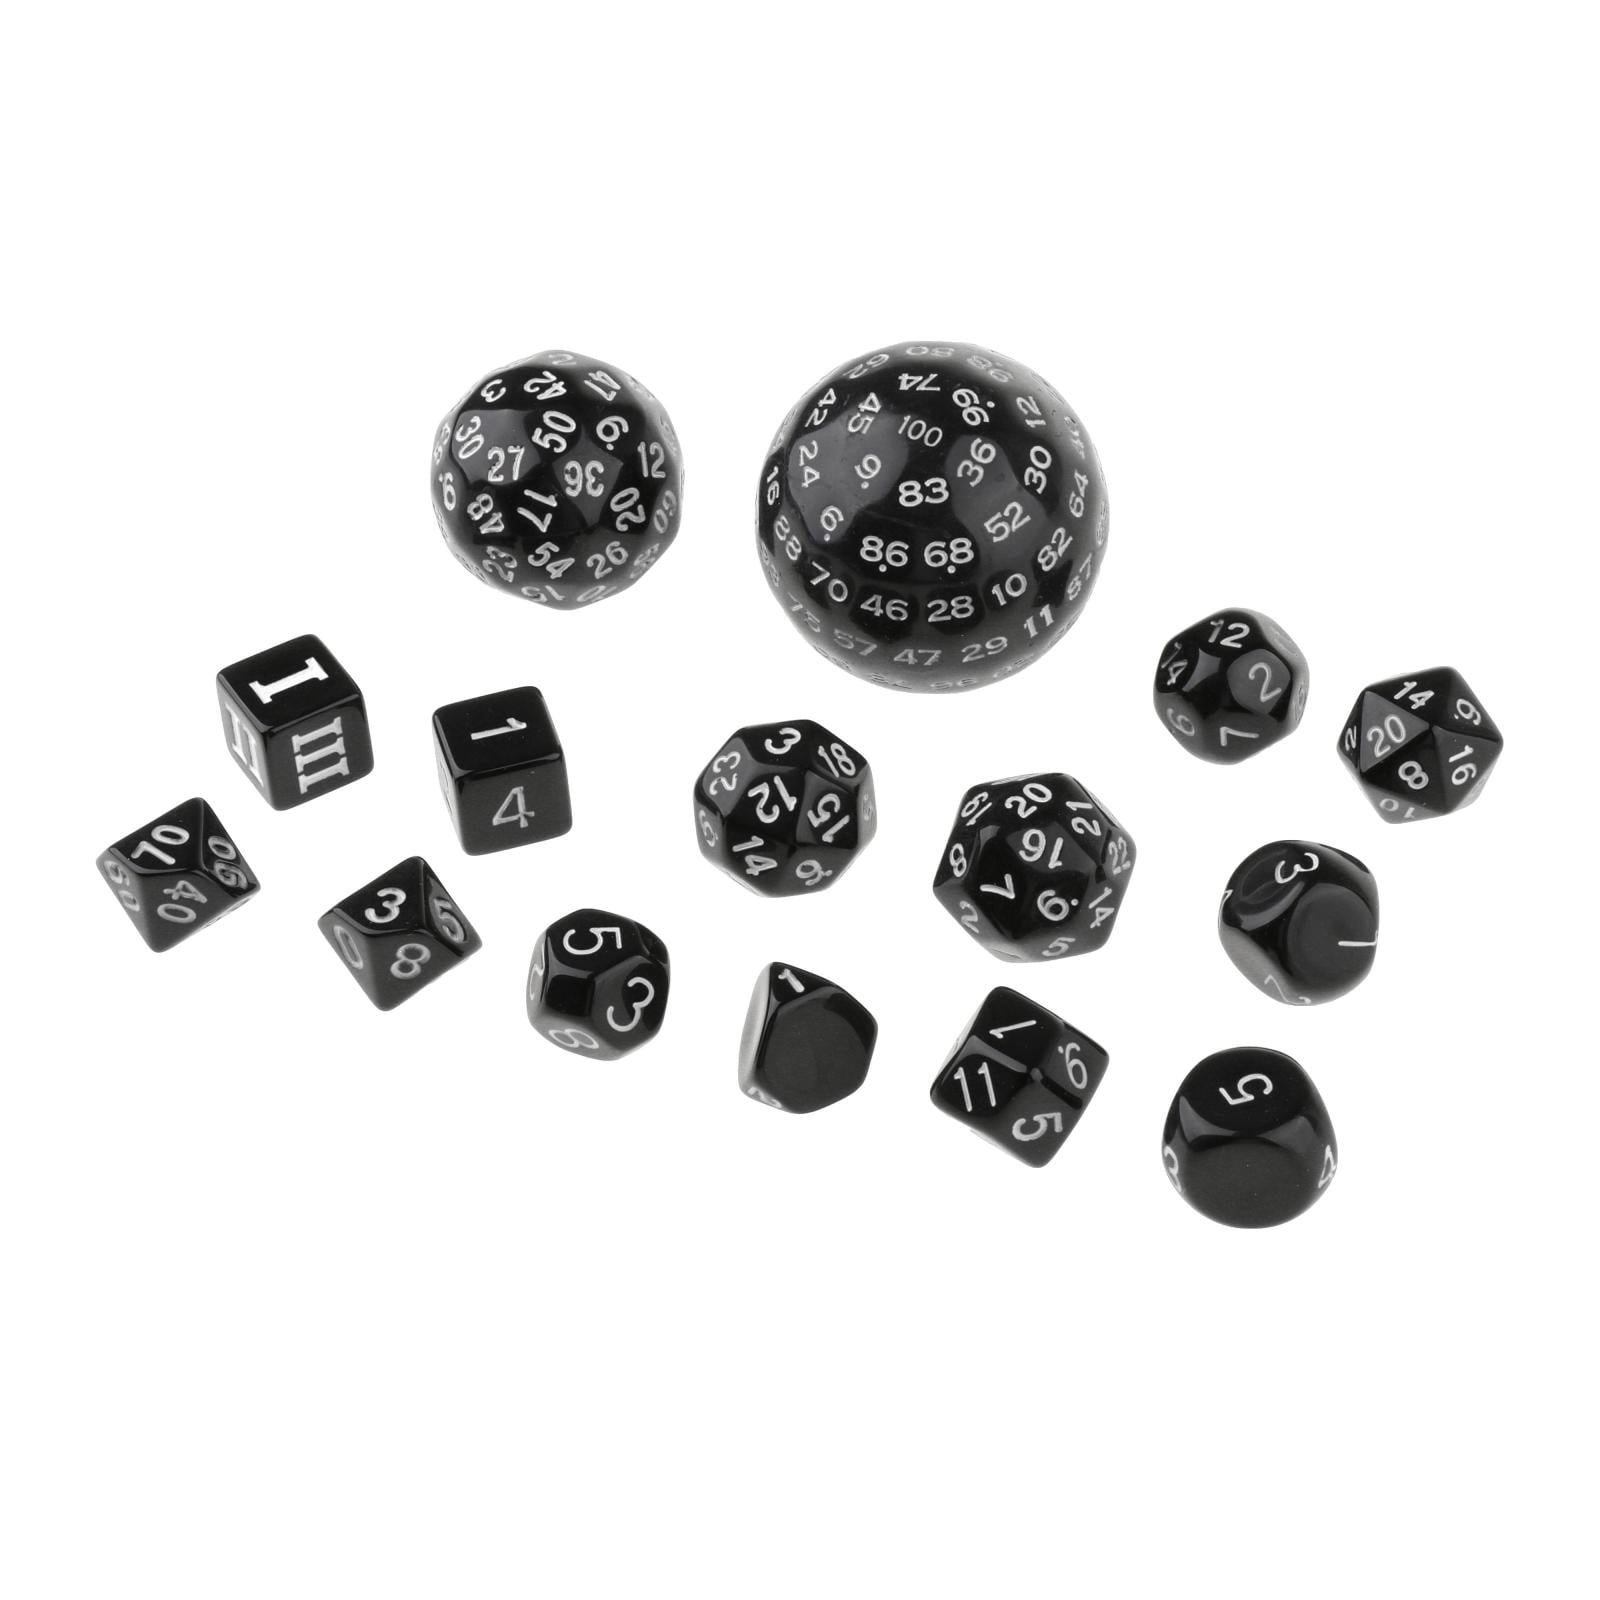 60 face Dice For Game Polyhedral D60 Multi Sided Acrylic Dice With Cloth BLUS 